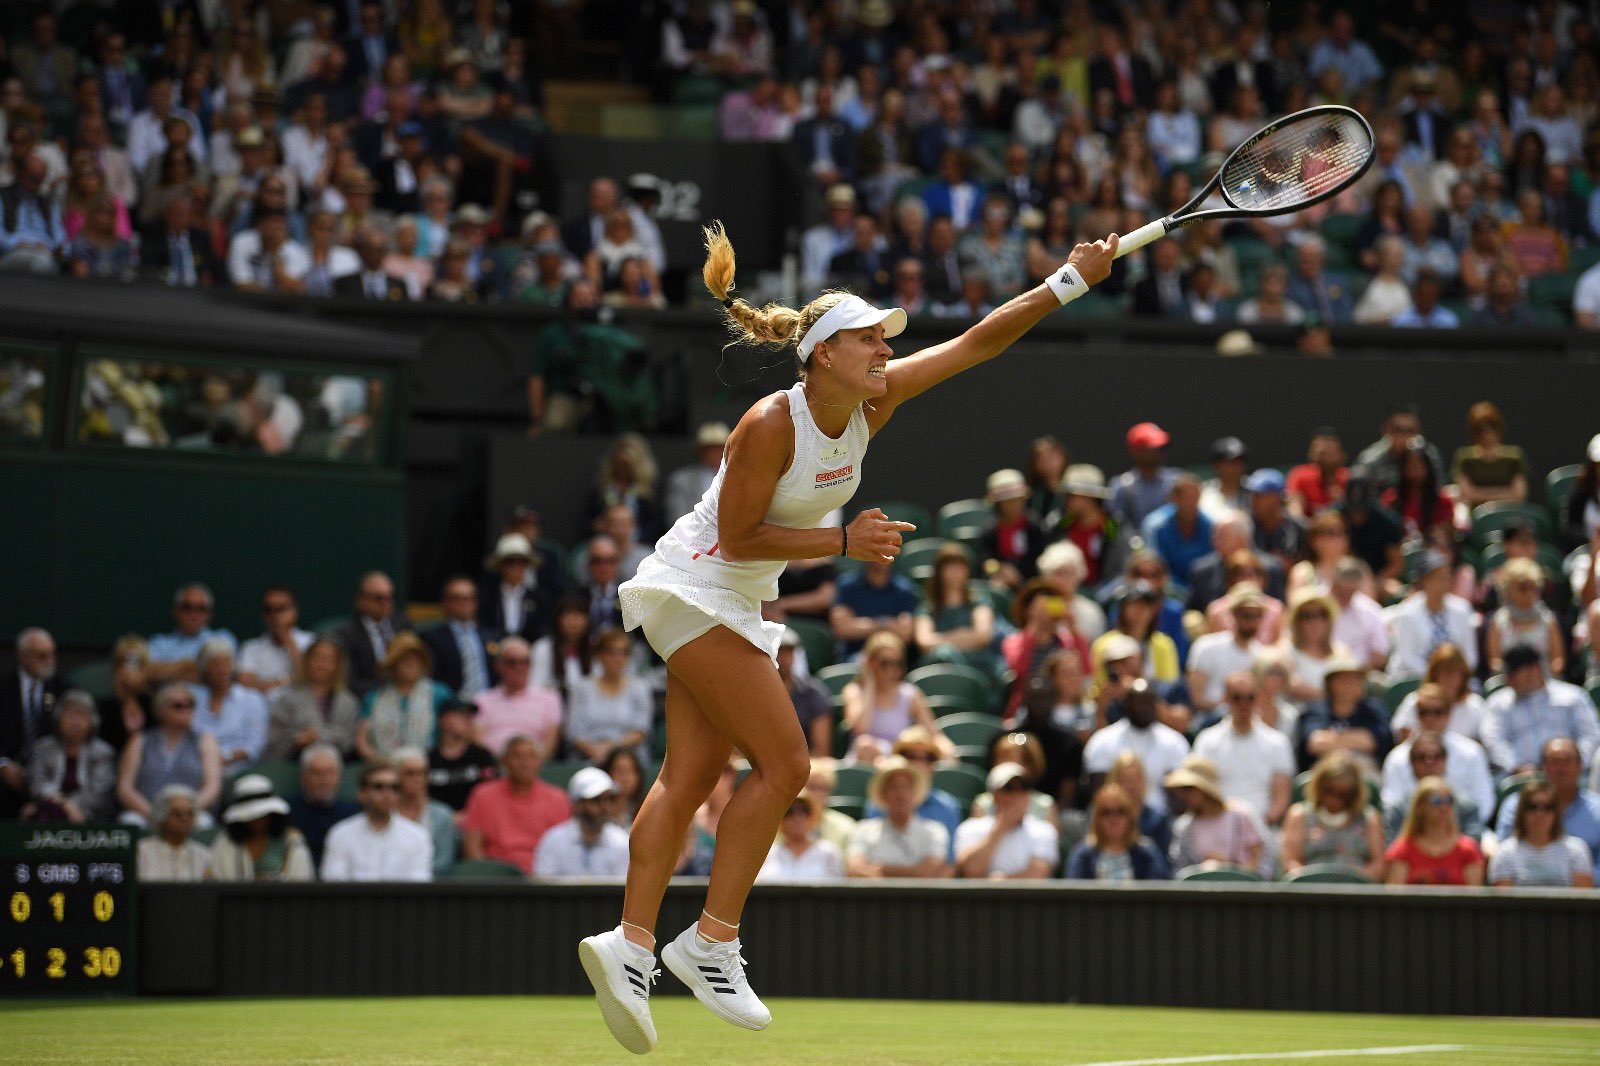 Tennis-Kerber ousted as Shapovalov, Rublev advance in Rome